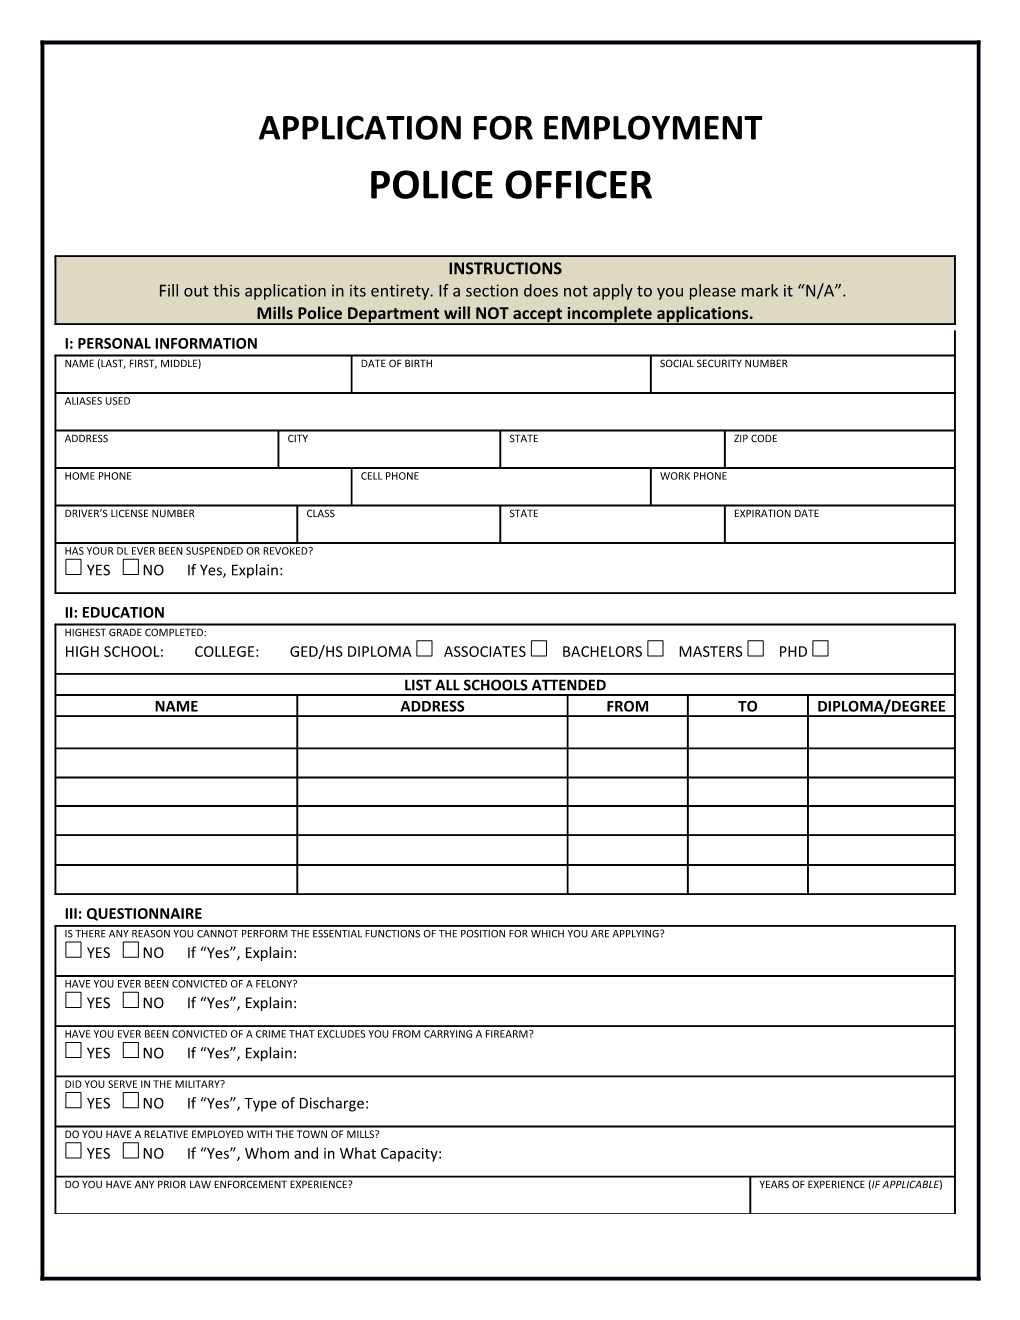 Application for Employment Police Officer